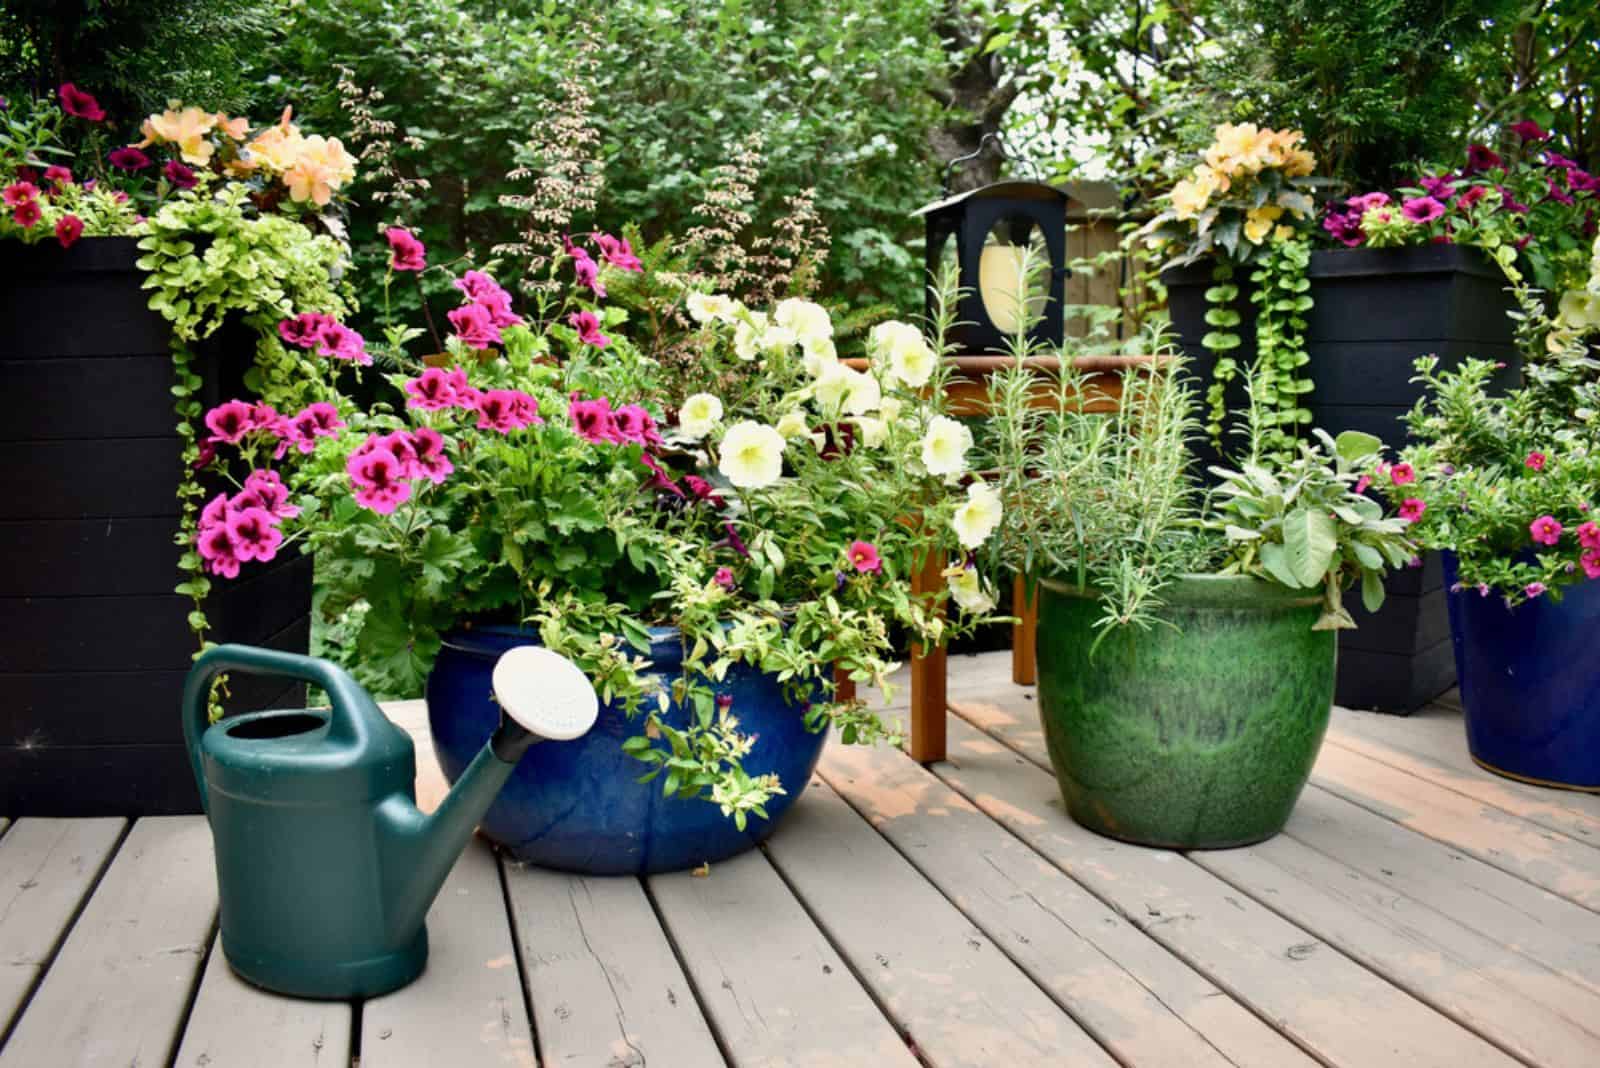 Backyard garden oasis setting with flowering planters